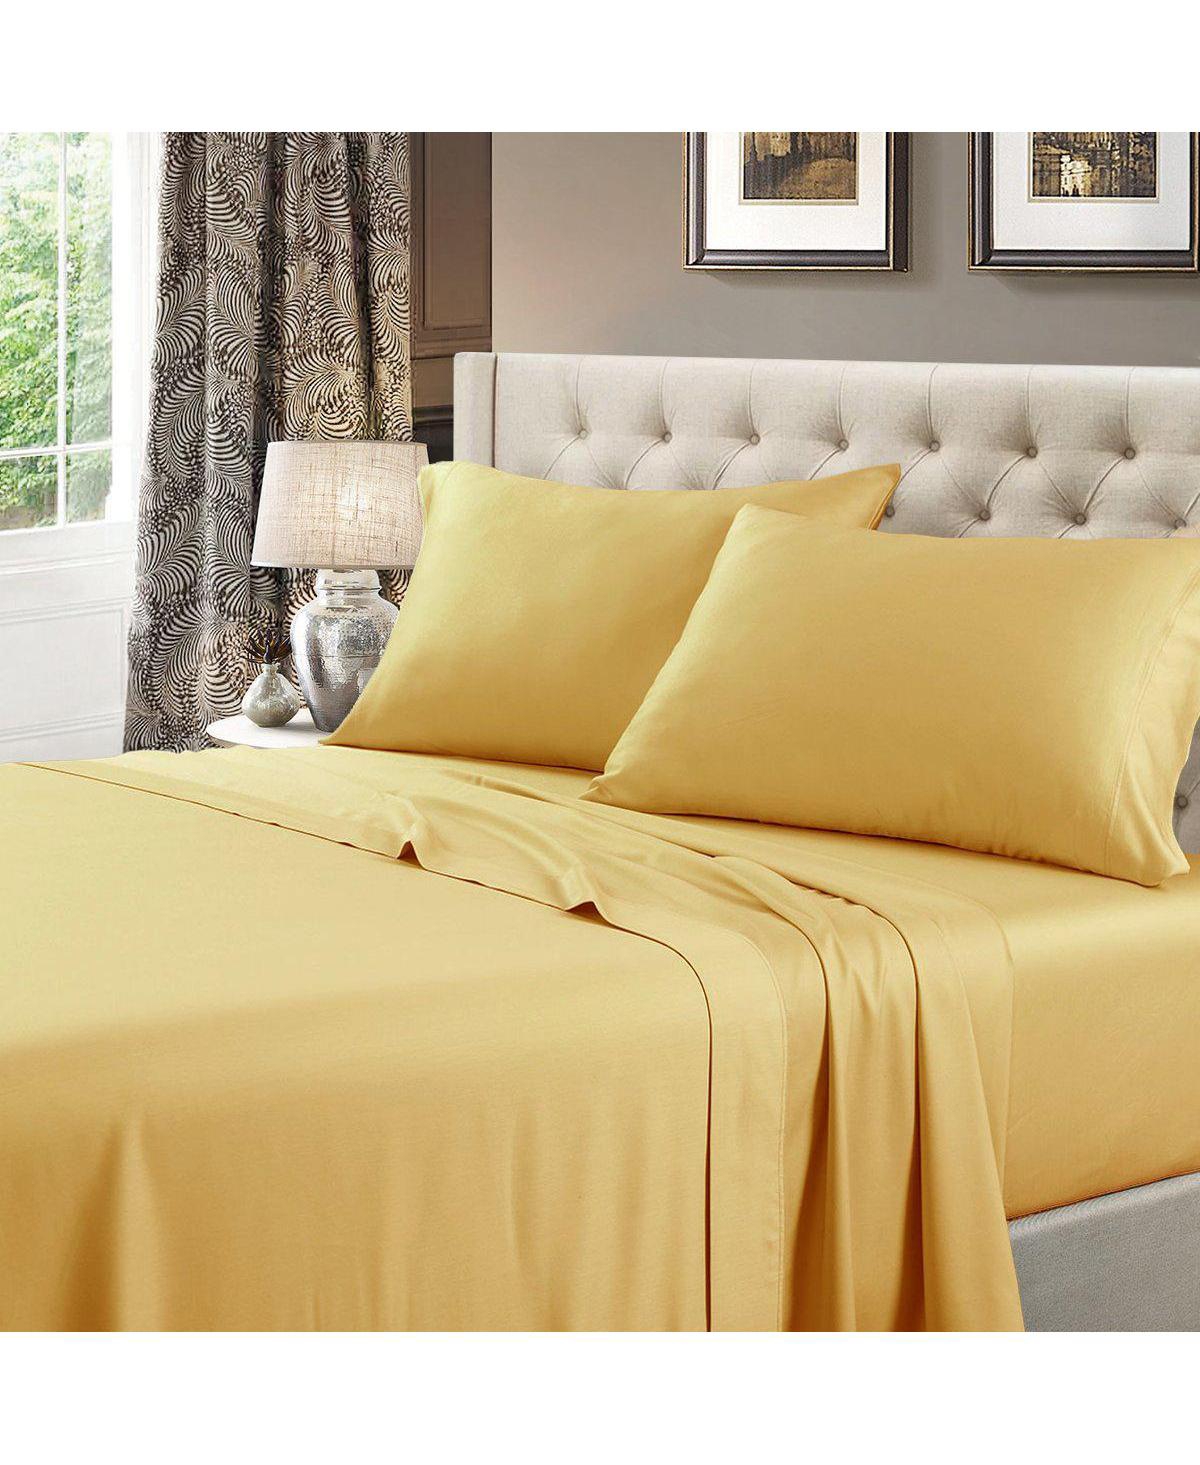 Egyptian Linens 600 Thread Count Solid Cotton Sheets Set, California King In Gold